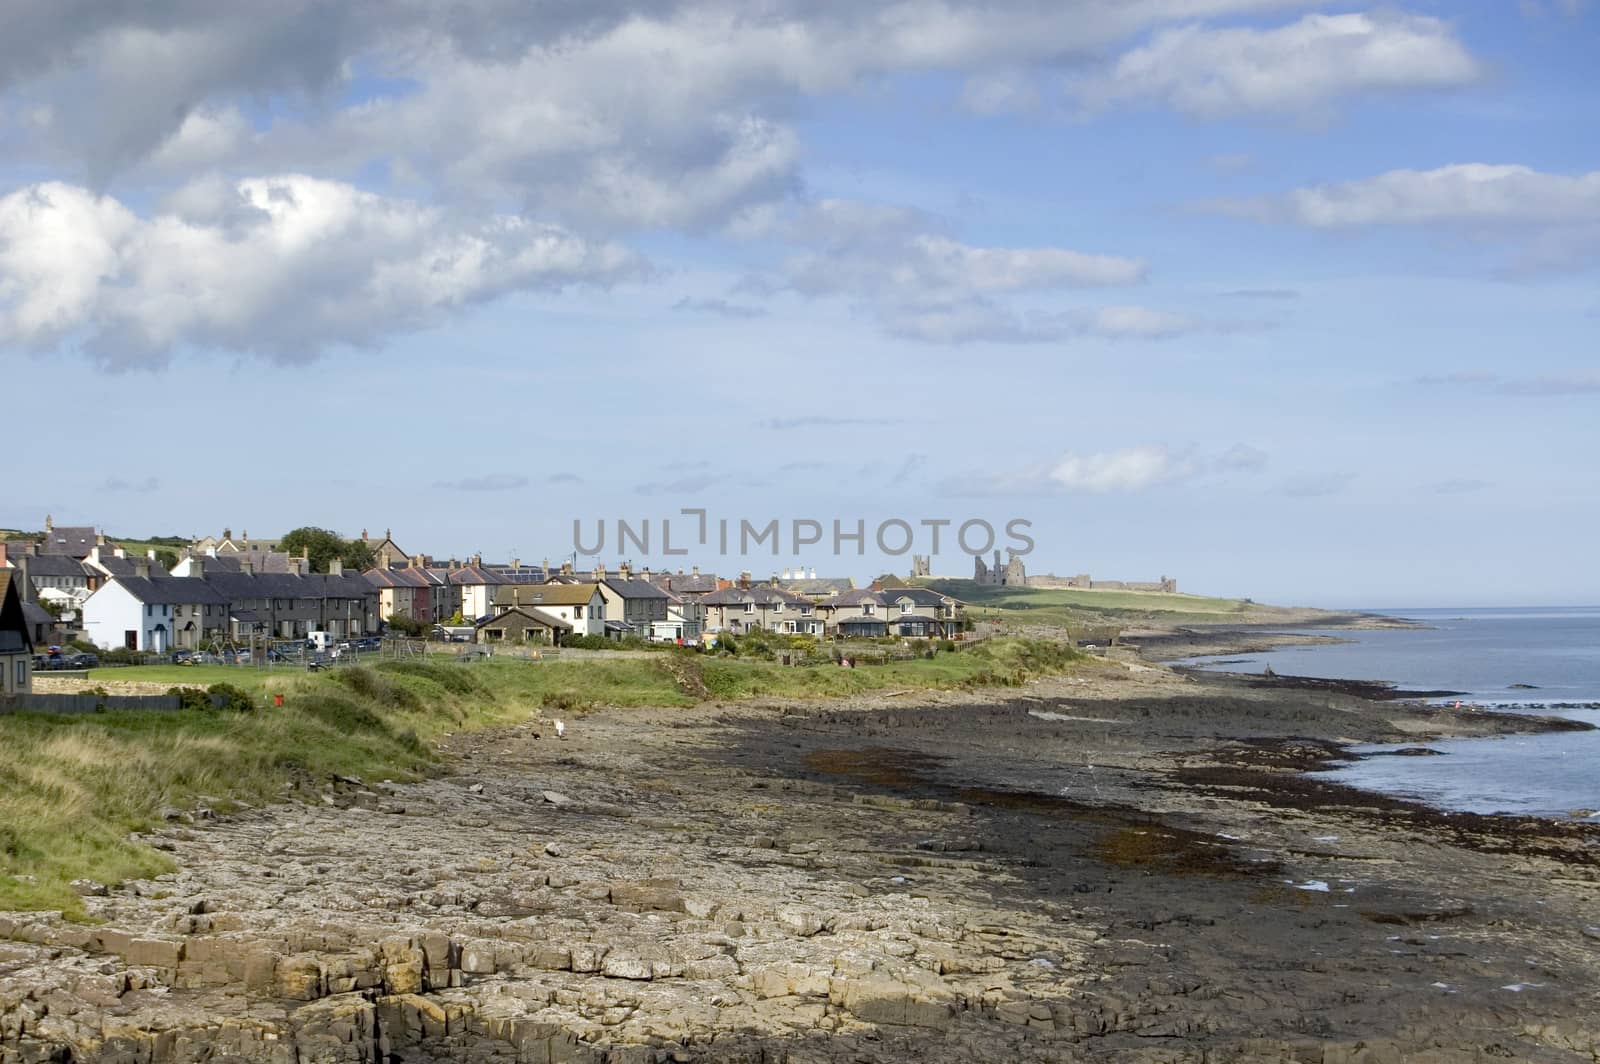 The Northumbrian village of Craster with the ruins of Dunstanburgh Castle in the distance